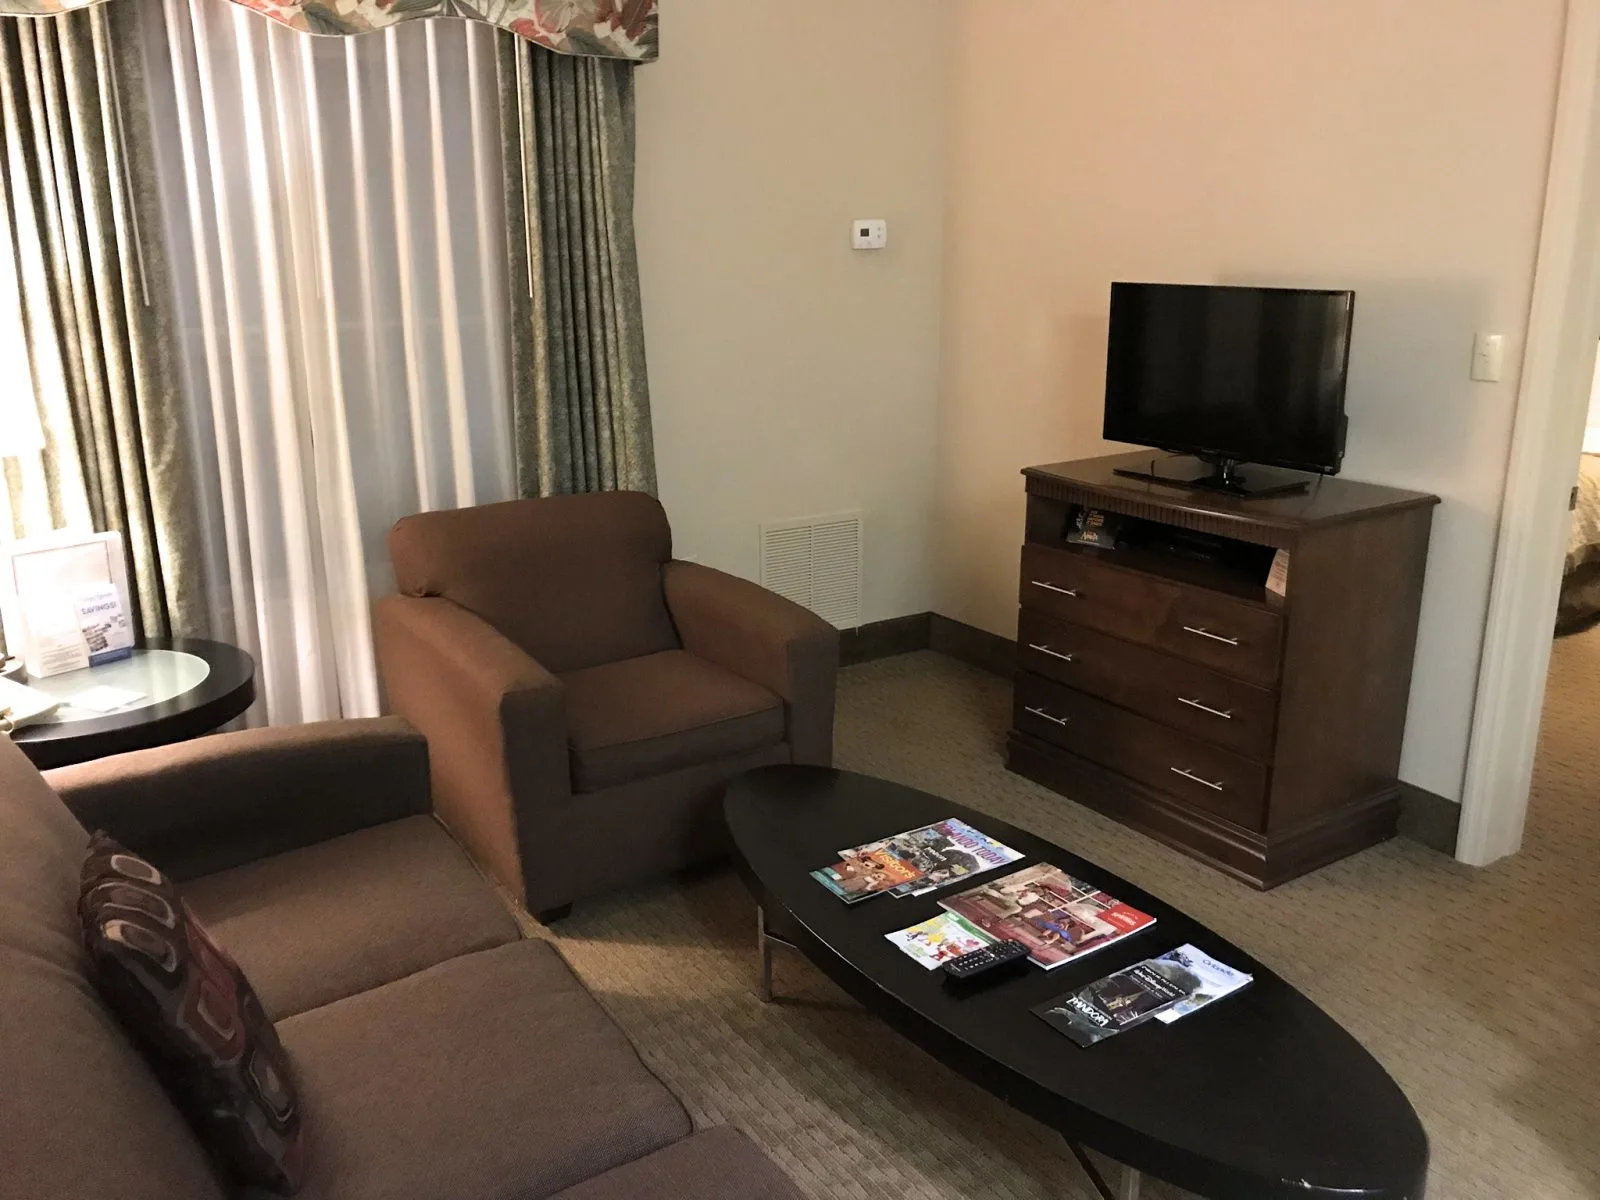 sitting area in the room, brown couches, black tables and tv